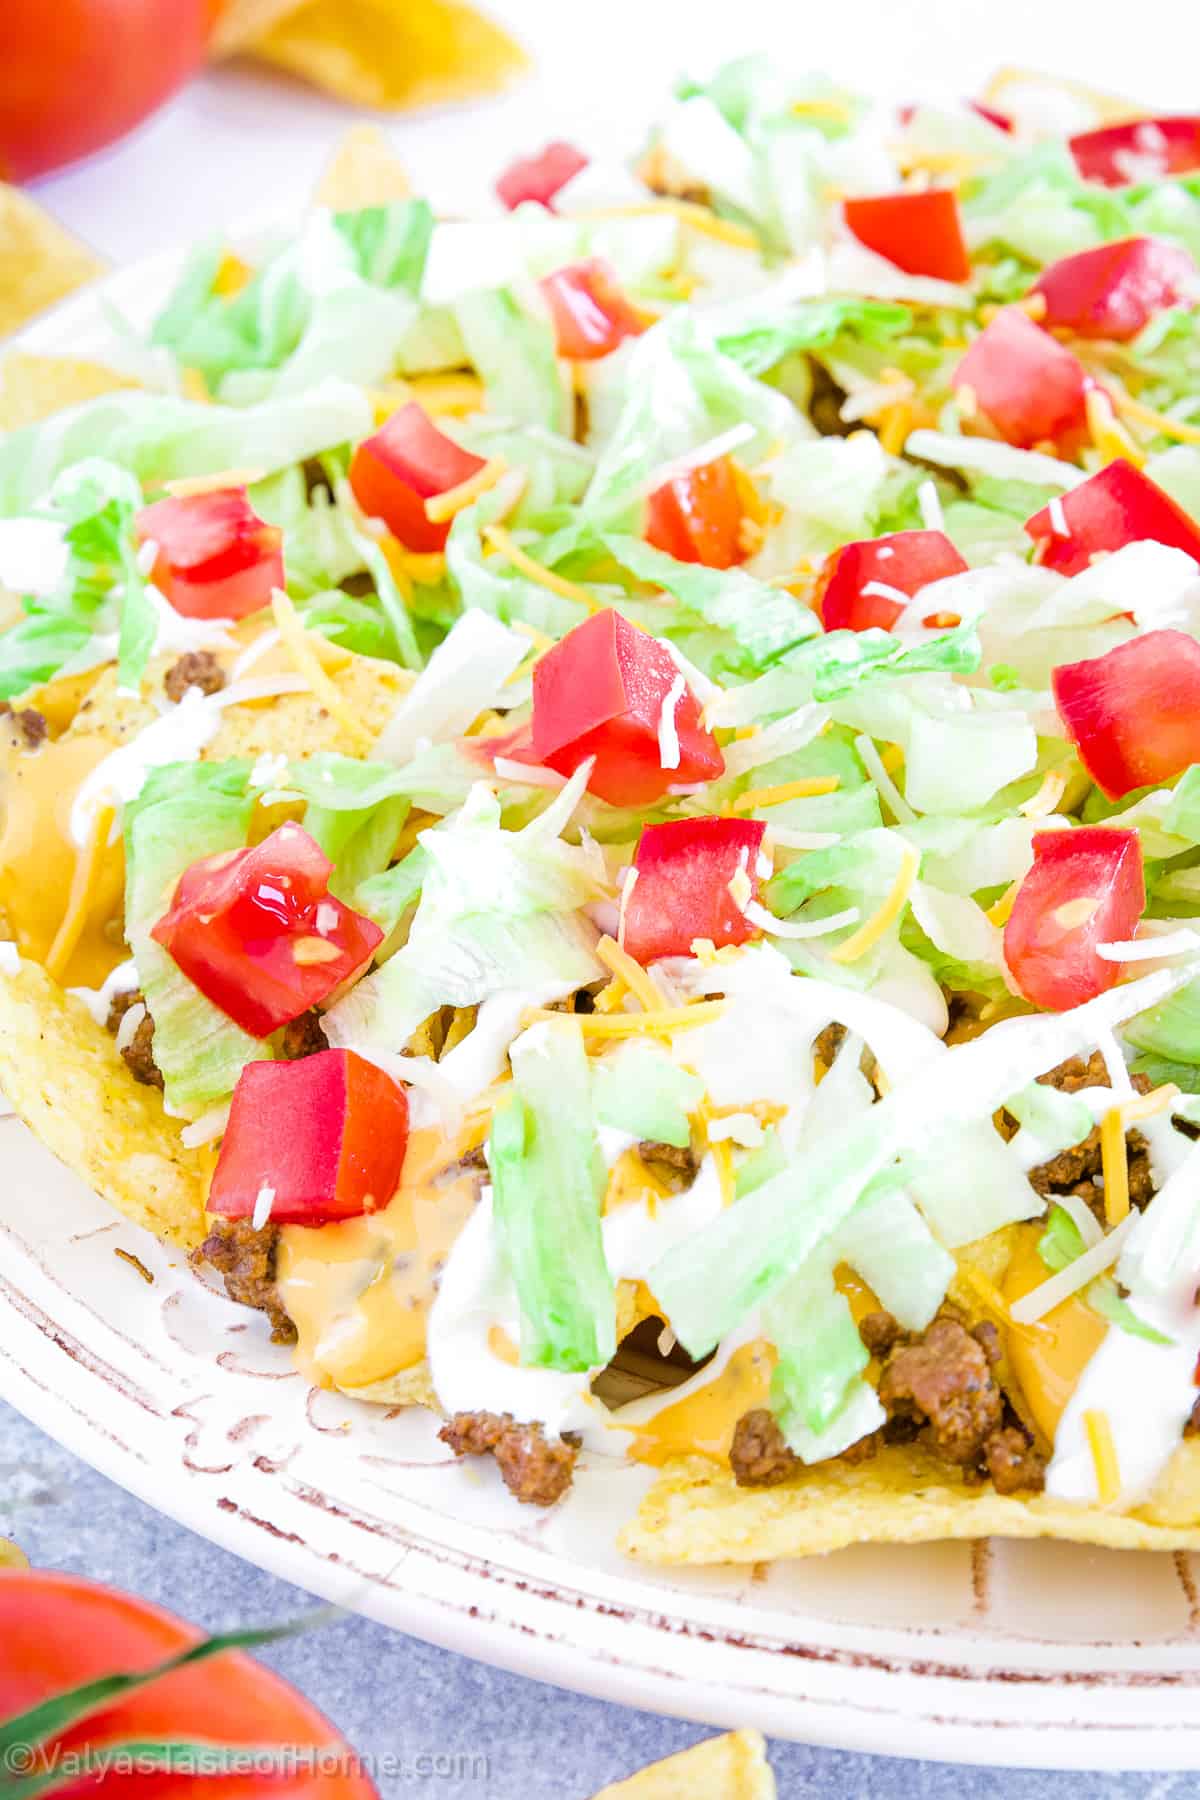 The crispiness of the nacho chips compliments the freshness of the lettuce, while the savory meat and creamy toppings add richness and depth.